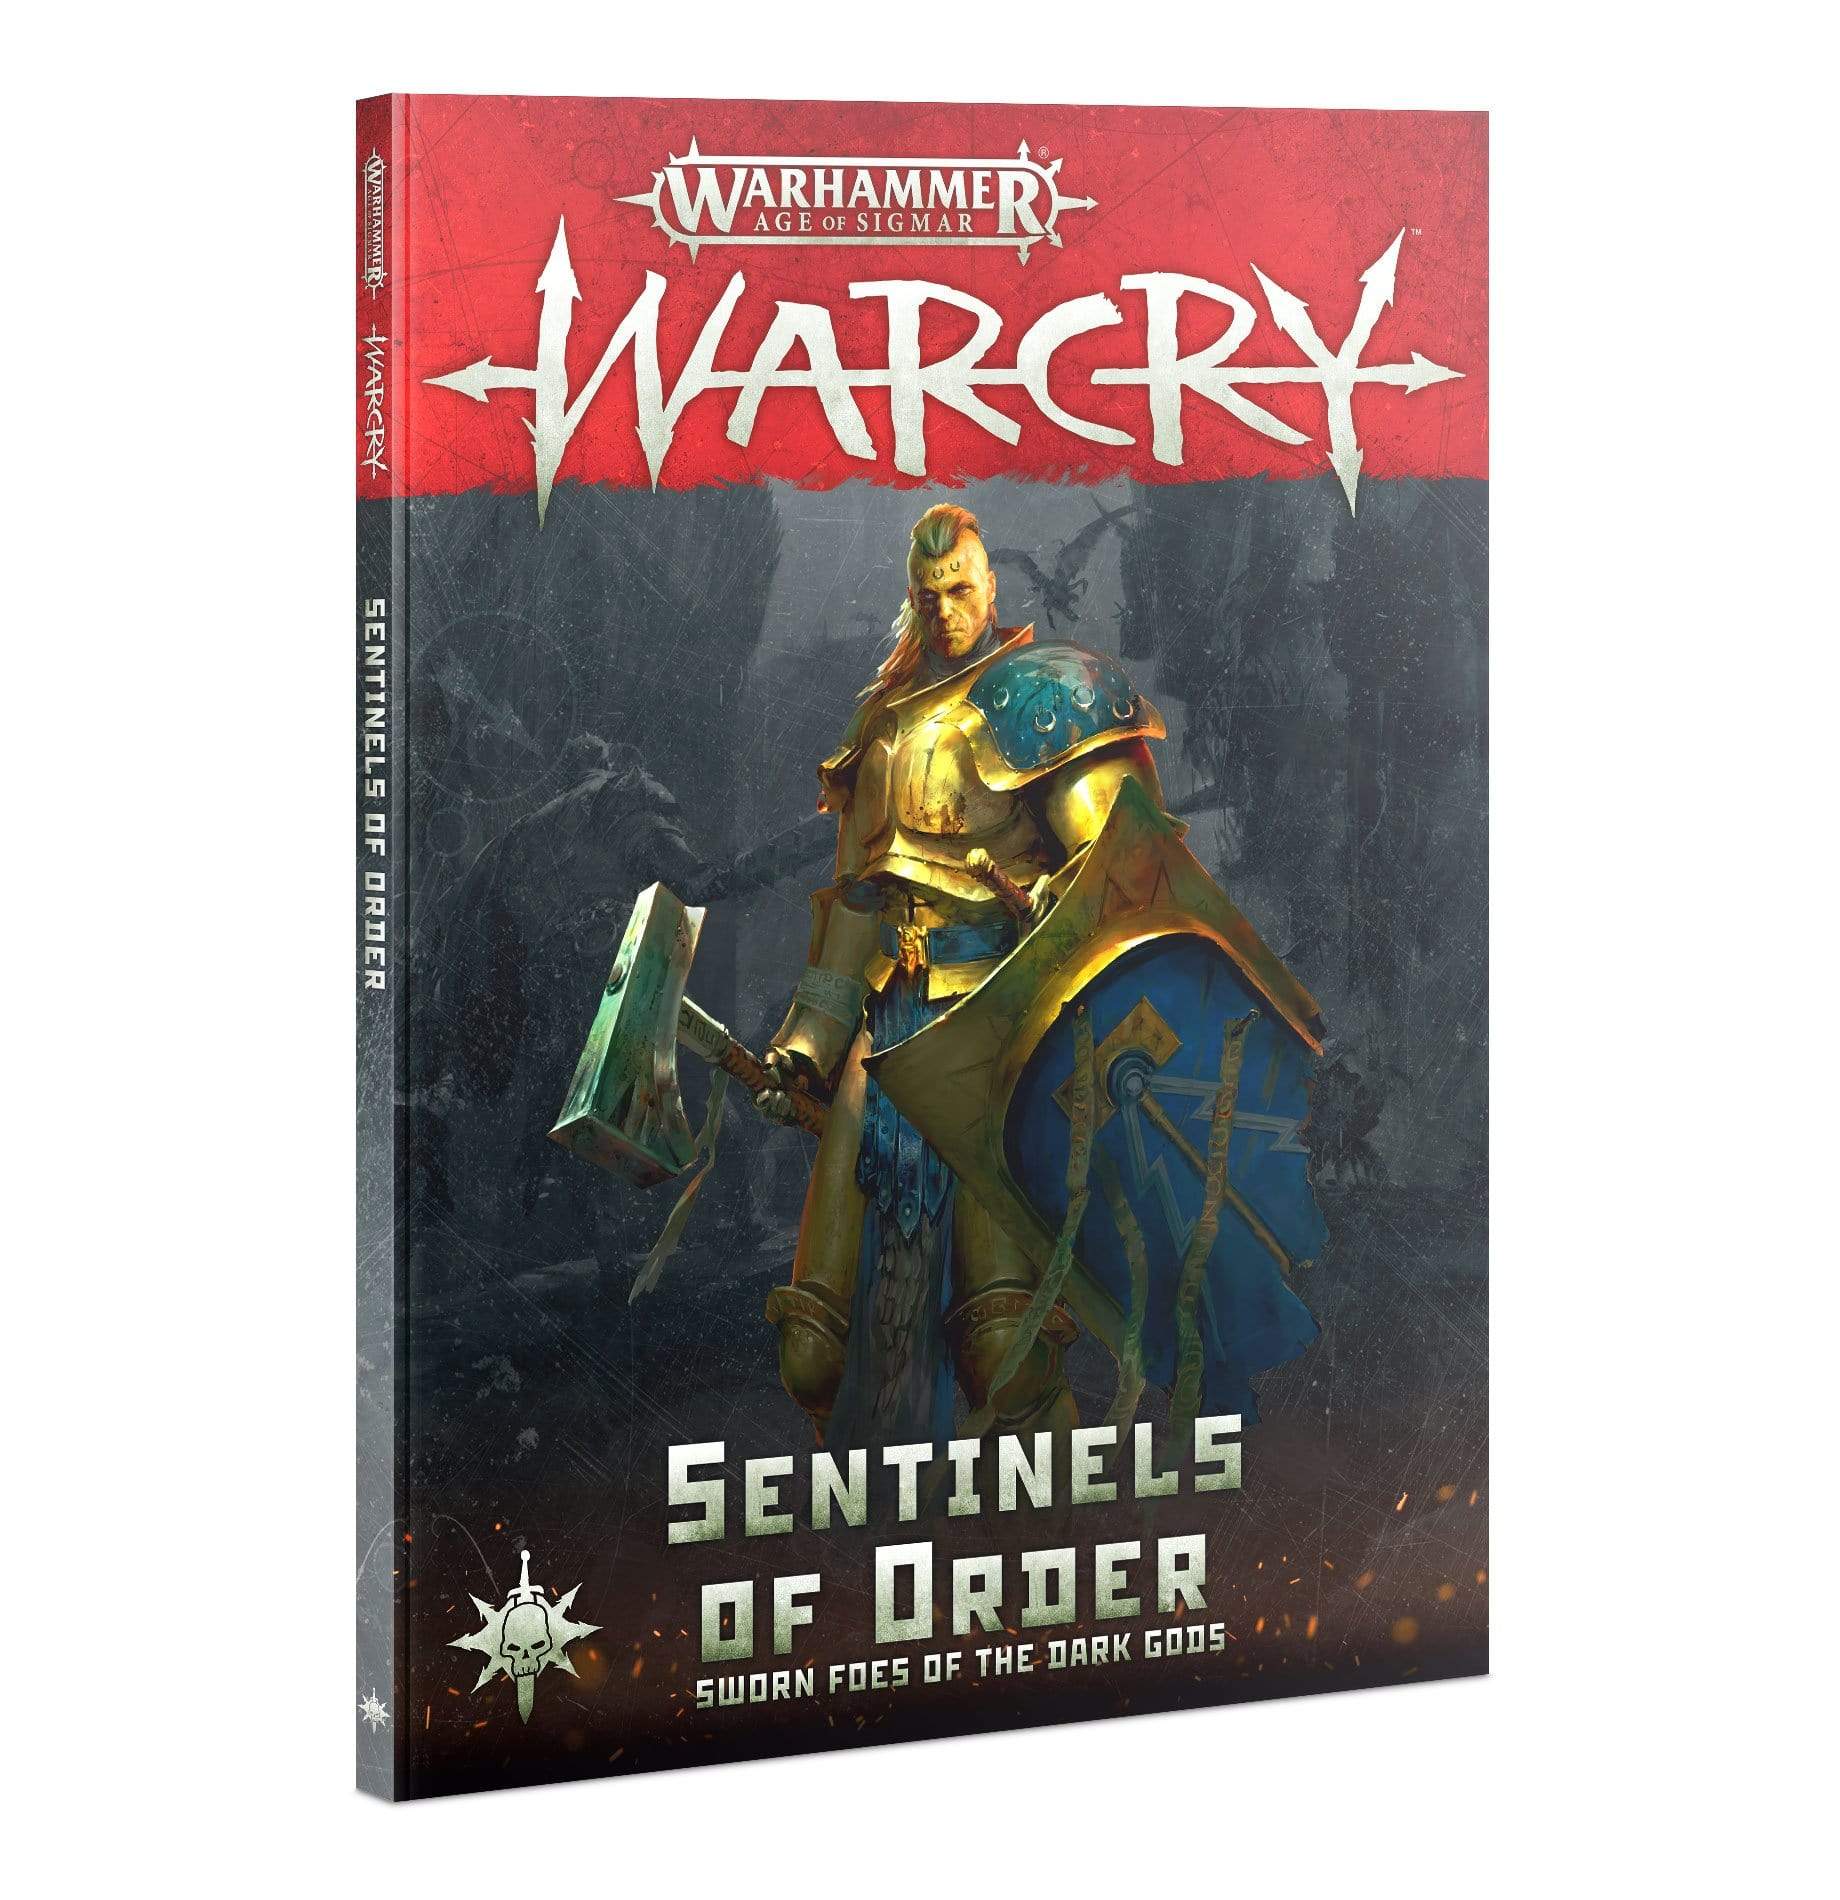 Warcry Sentinels of Order - Saltire Games